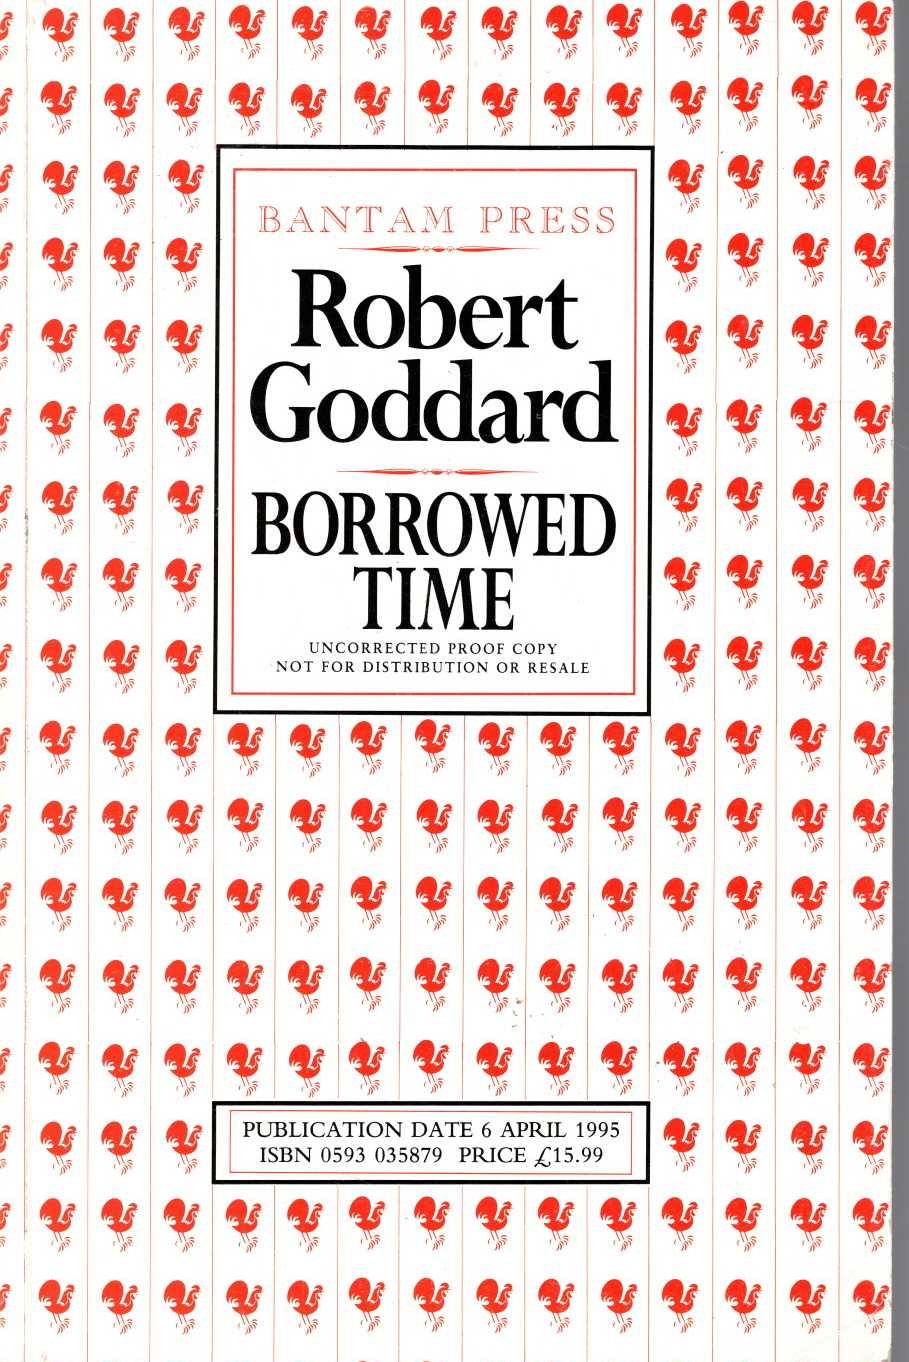 BORROWED TIME front book cover image